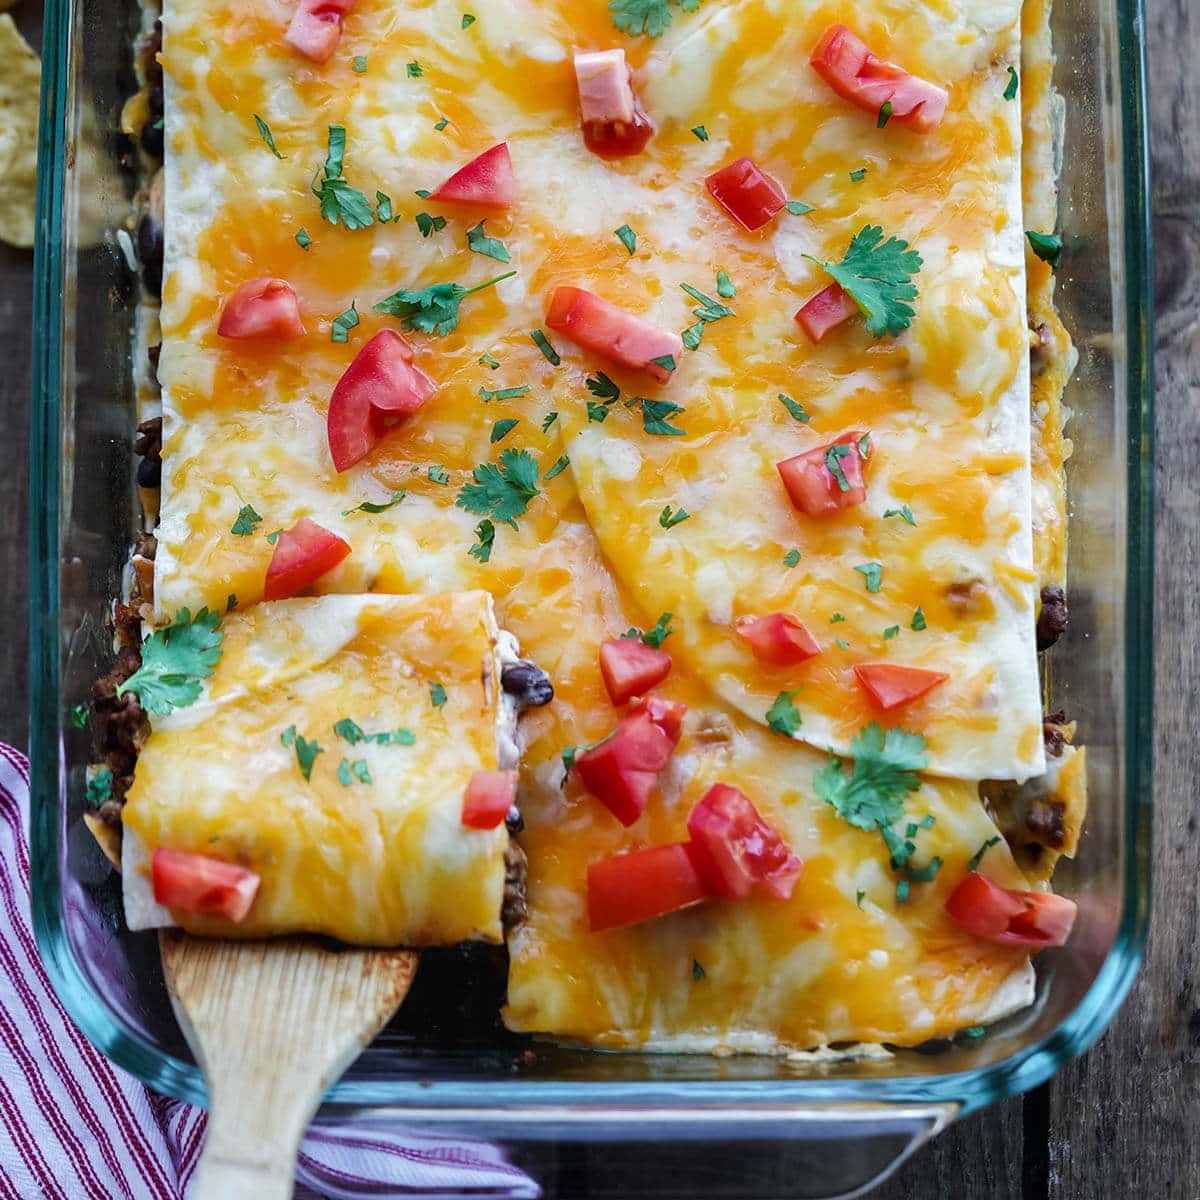 Casserole in baking dish with serving spatula.